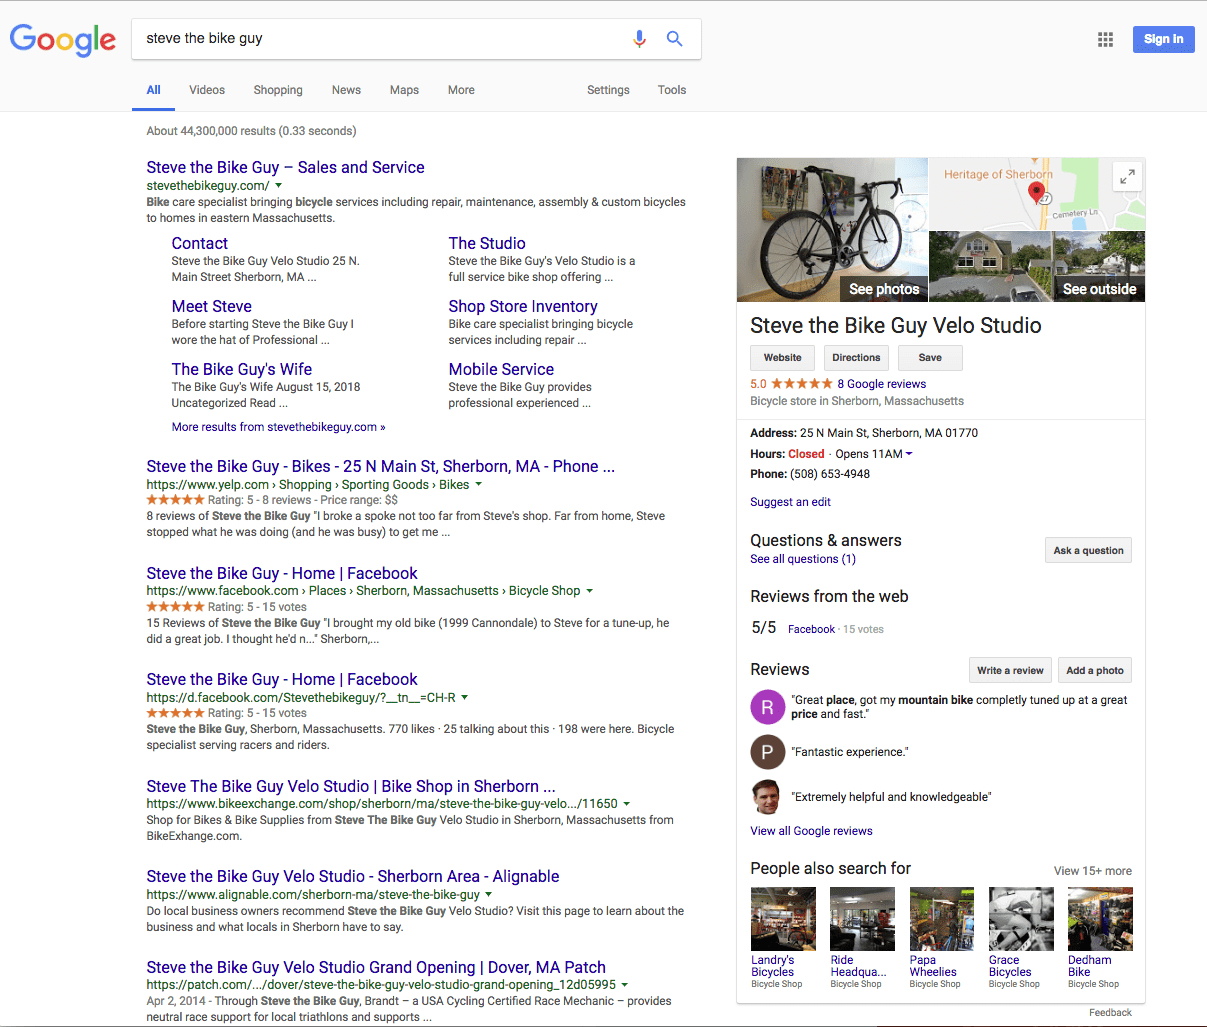 Steve the Bike Guy listing with Google Business showing on right.